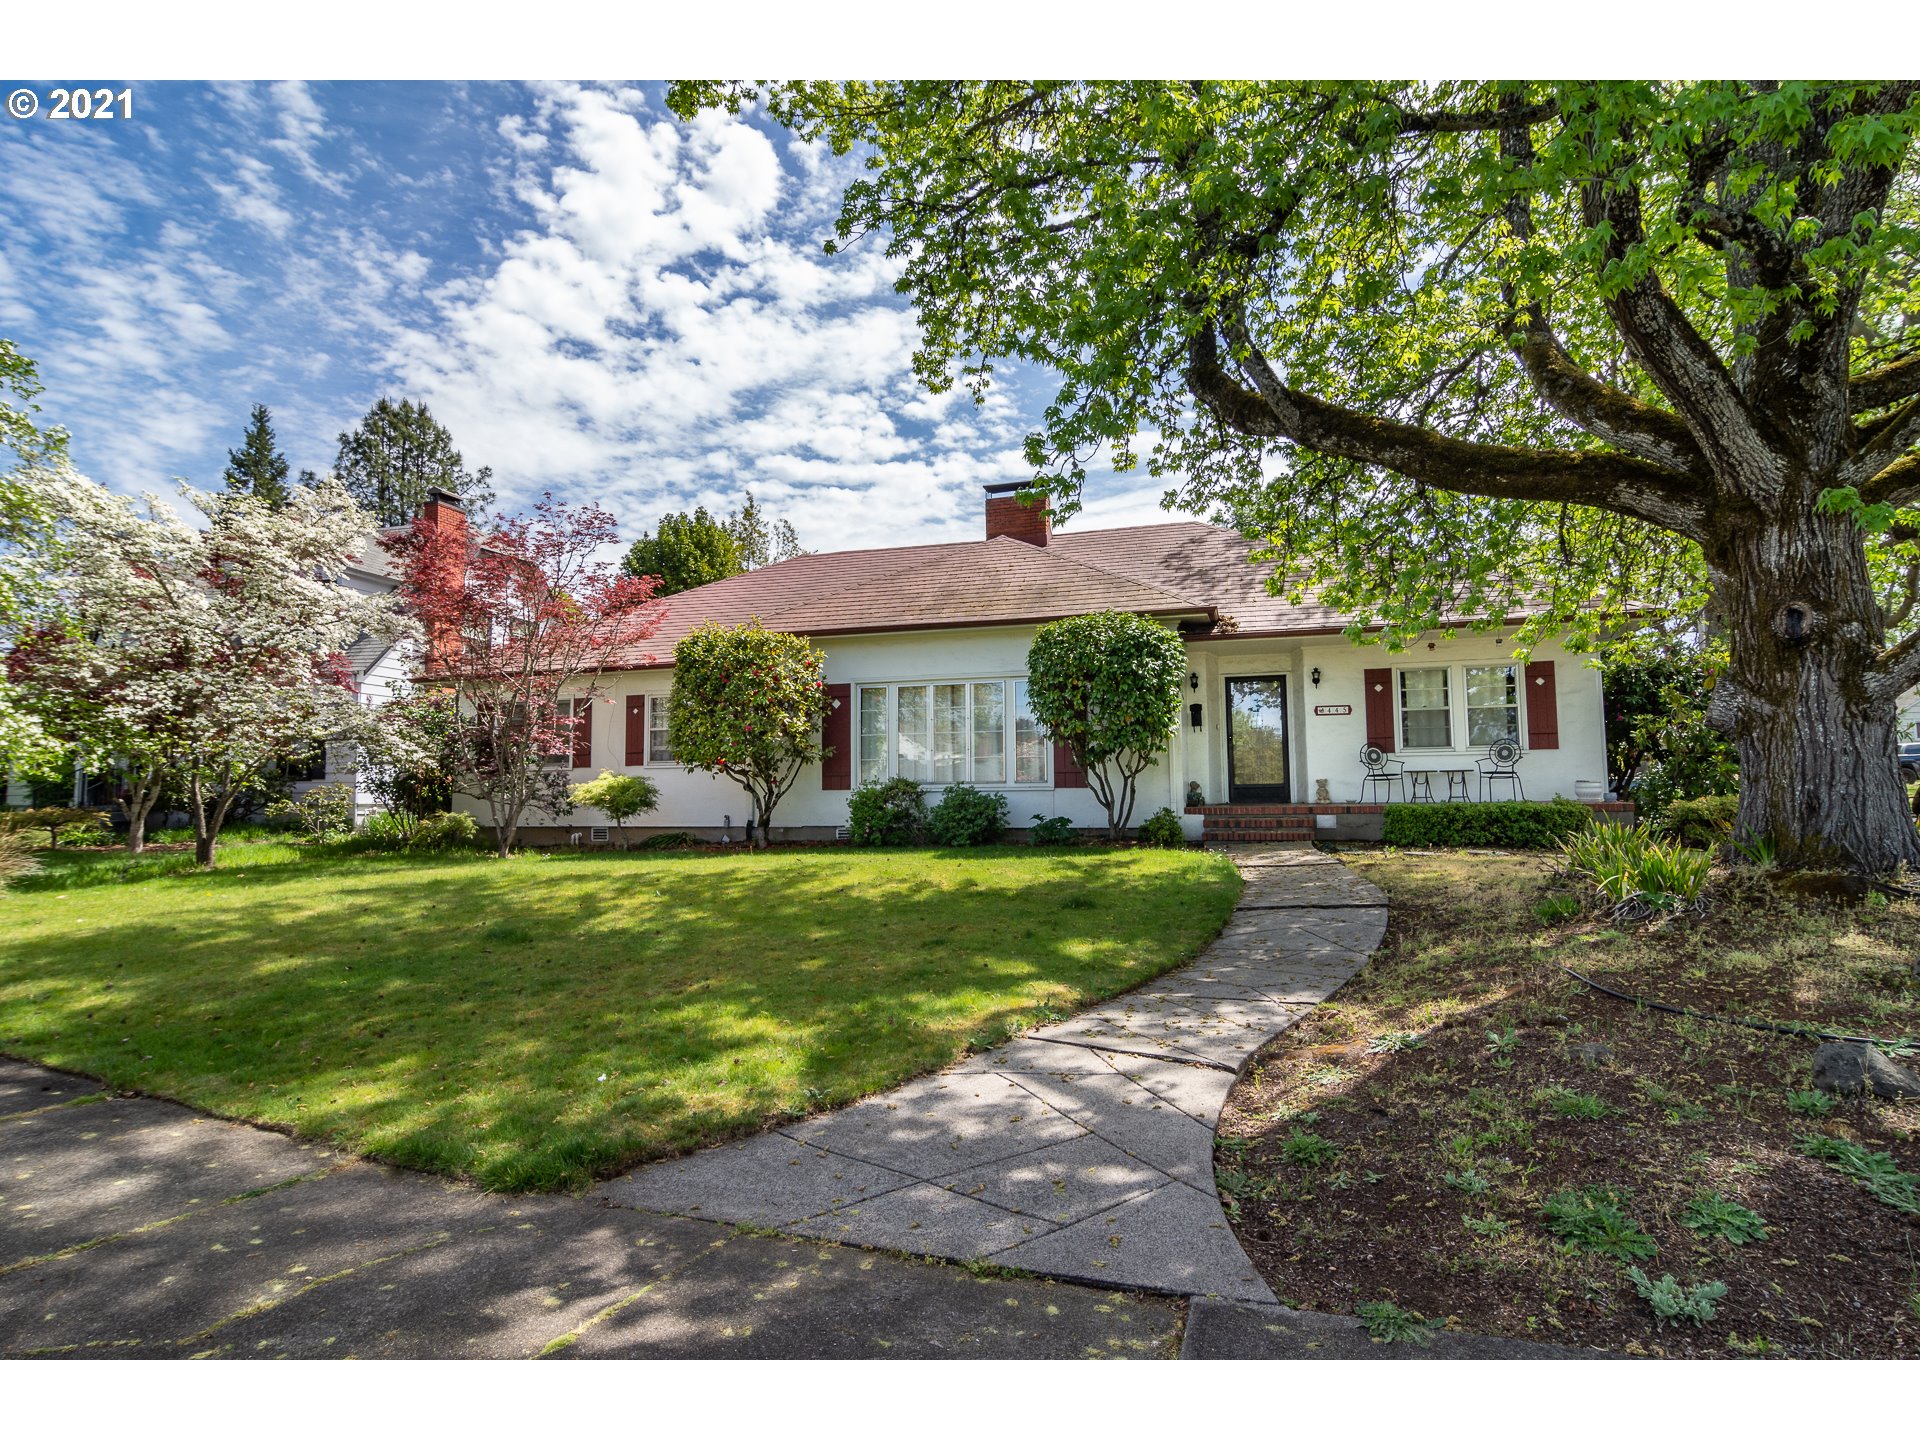 445 W MADRONE ST (1 of 25)